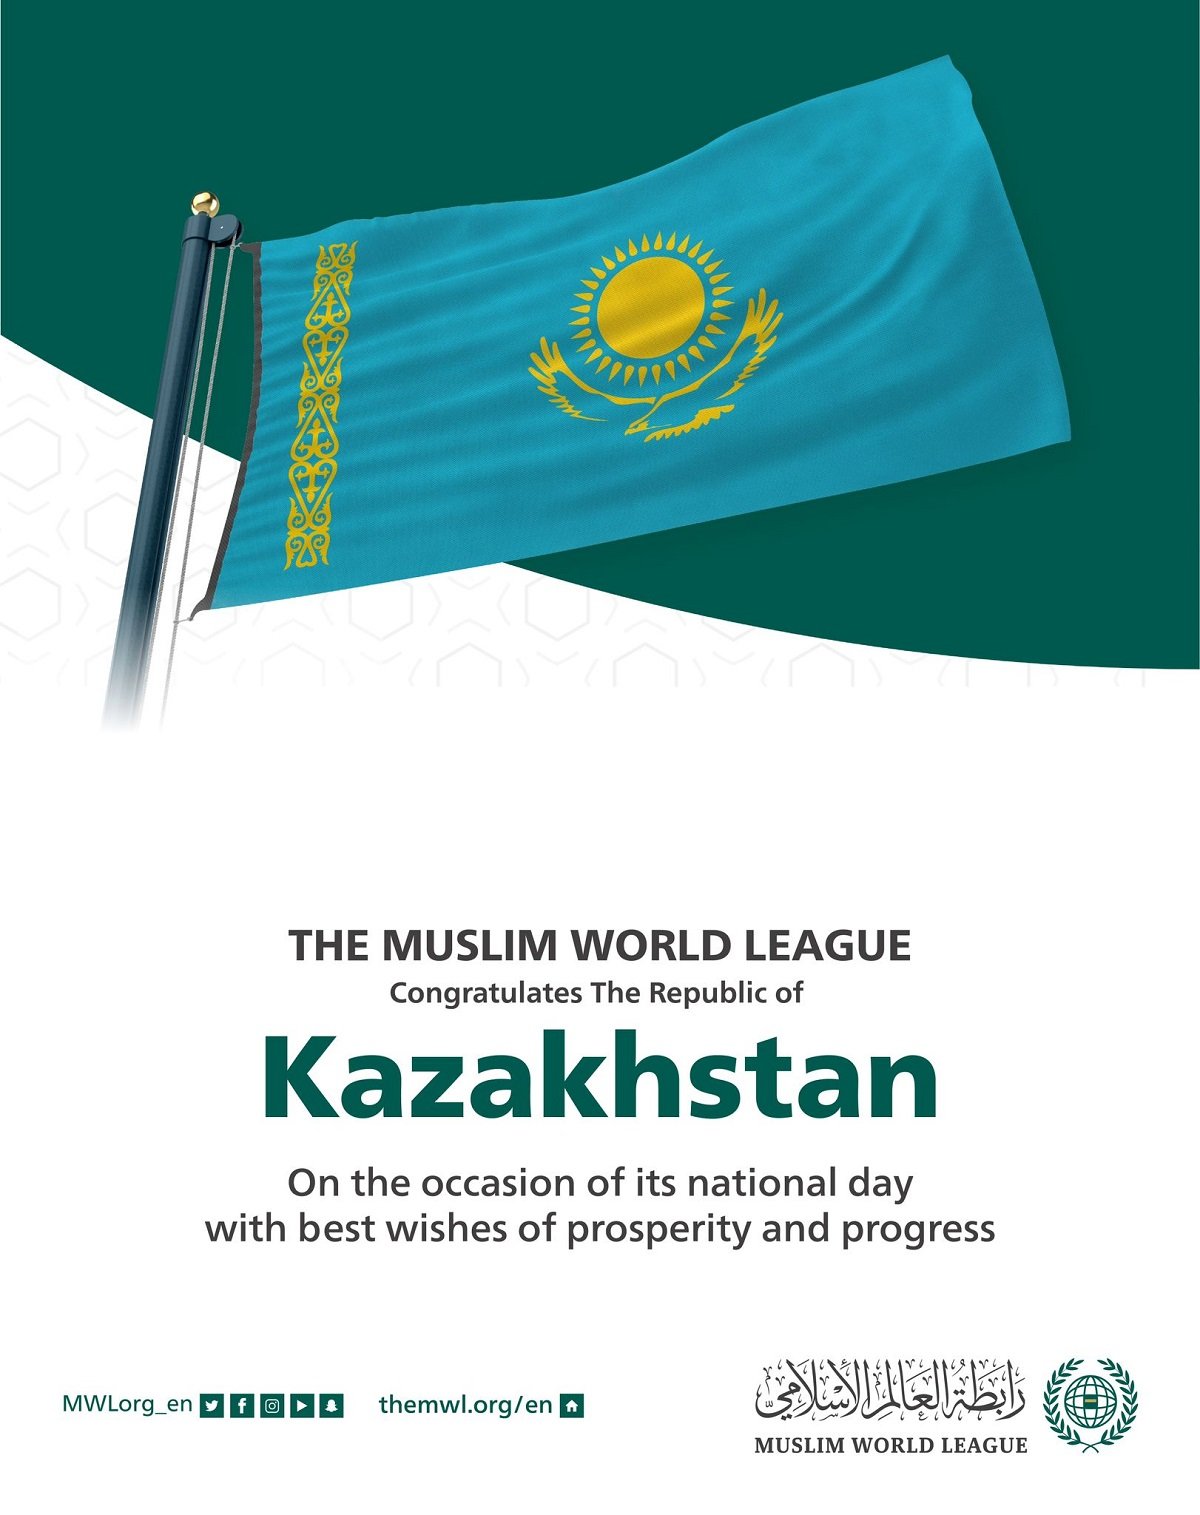 The Muslim World League congratulates the Republic of Kazakhstan on the occasion of its National day: